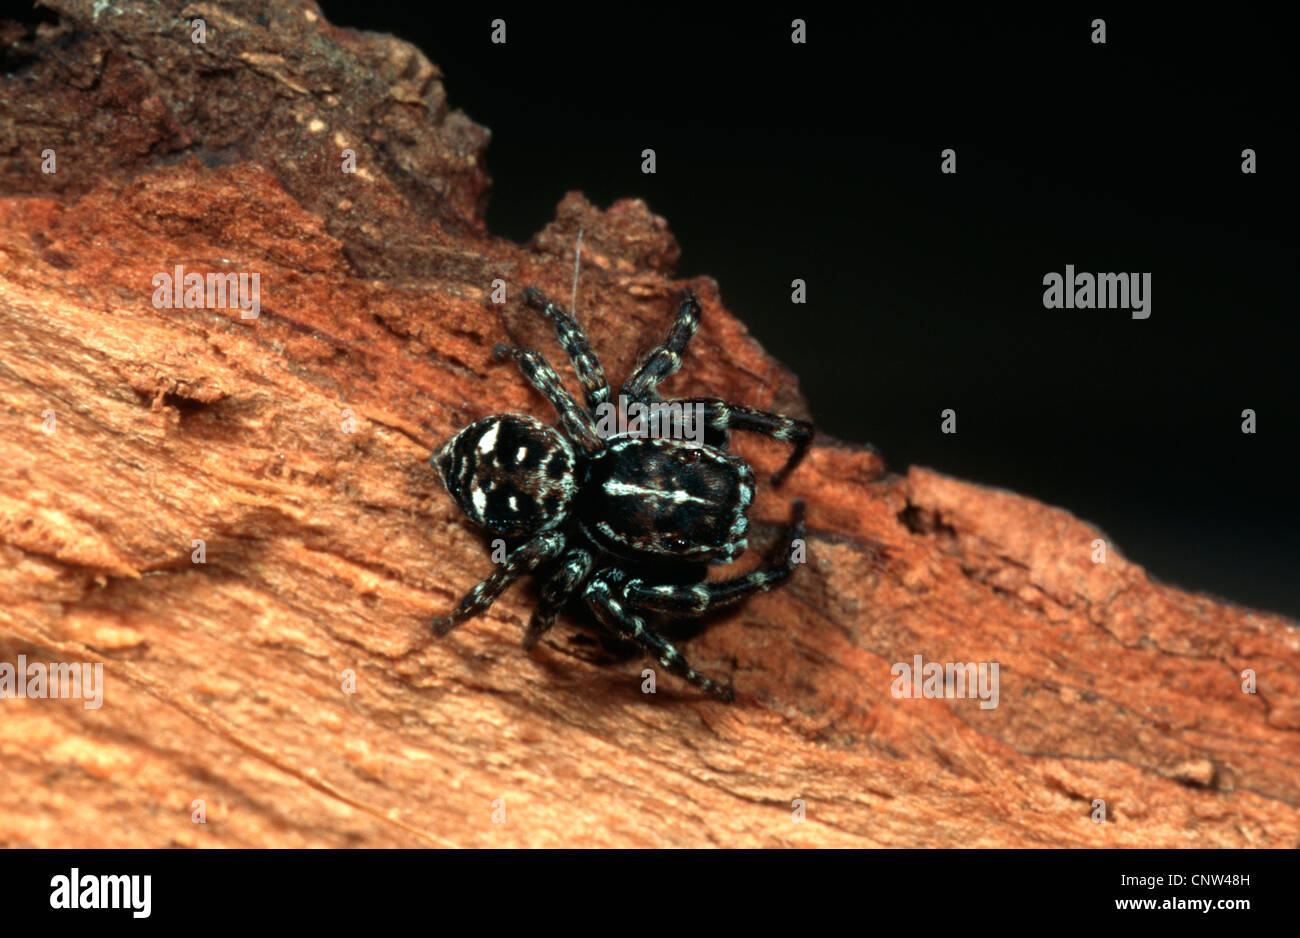 Jumping spider (Sitticus floricola), sitting on wood, Germany Stock Photo